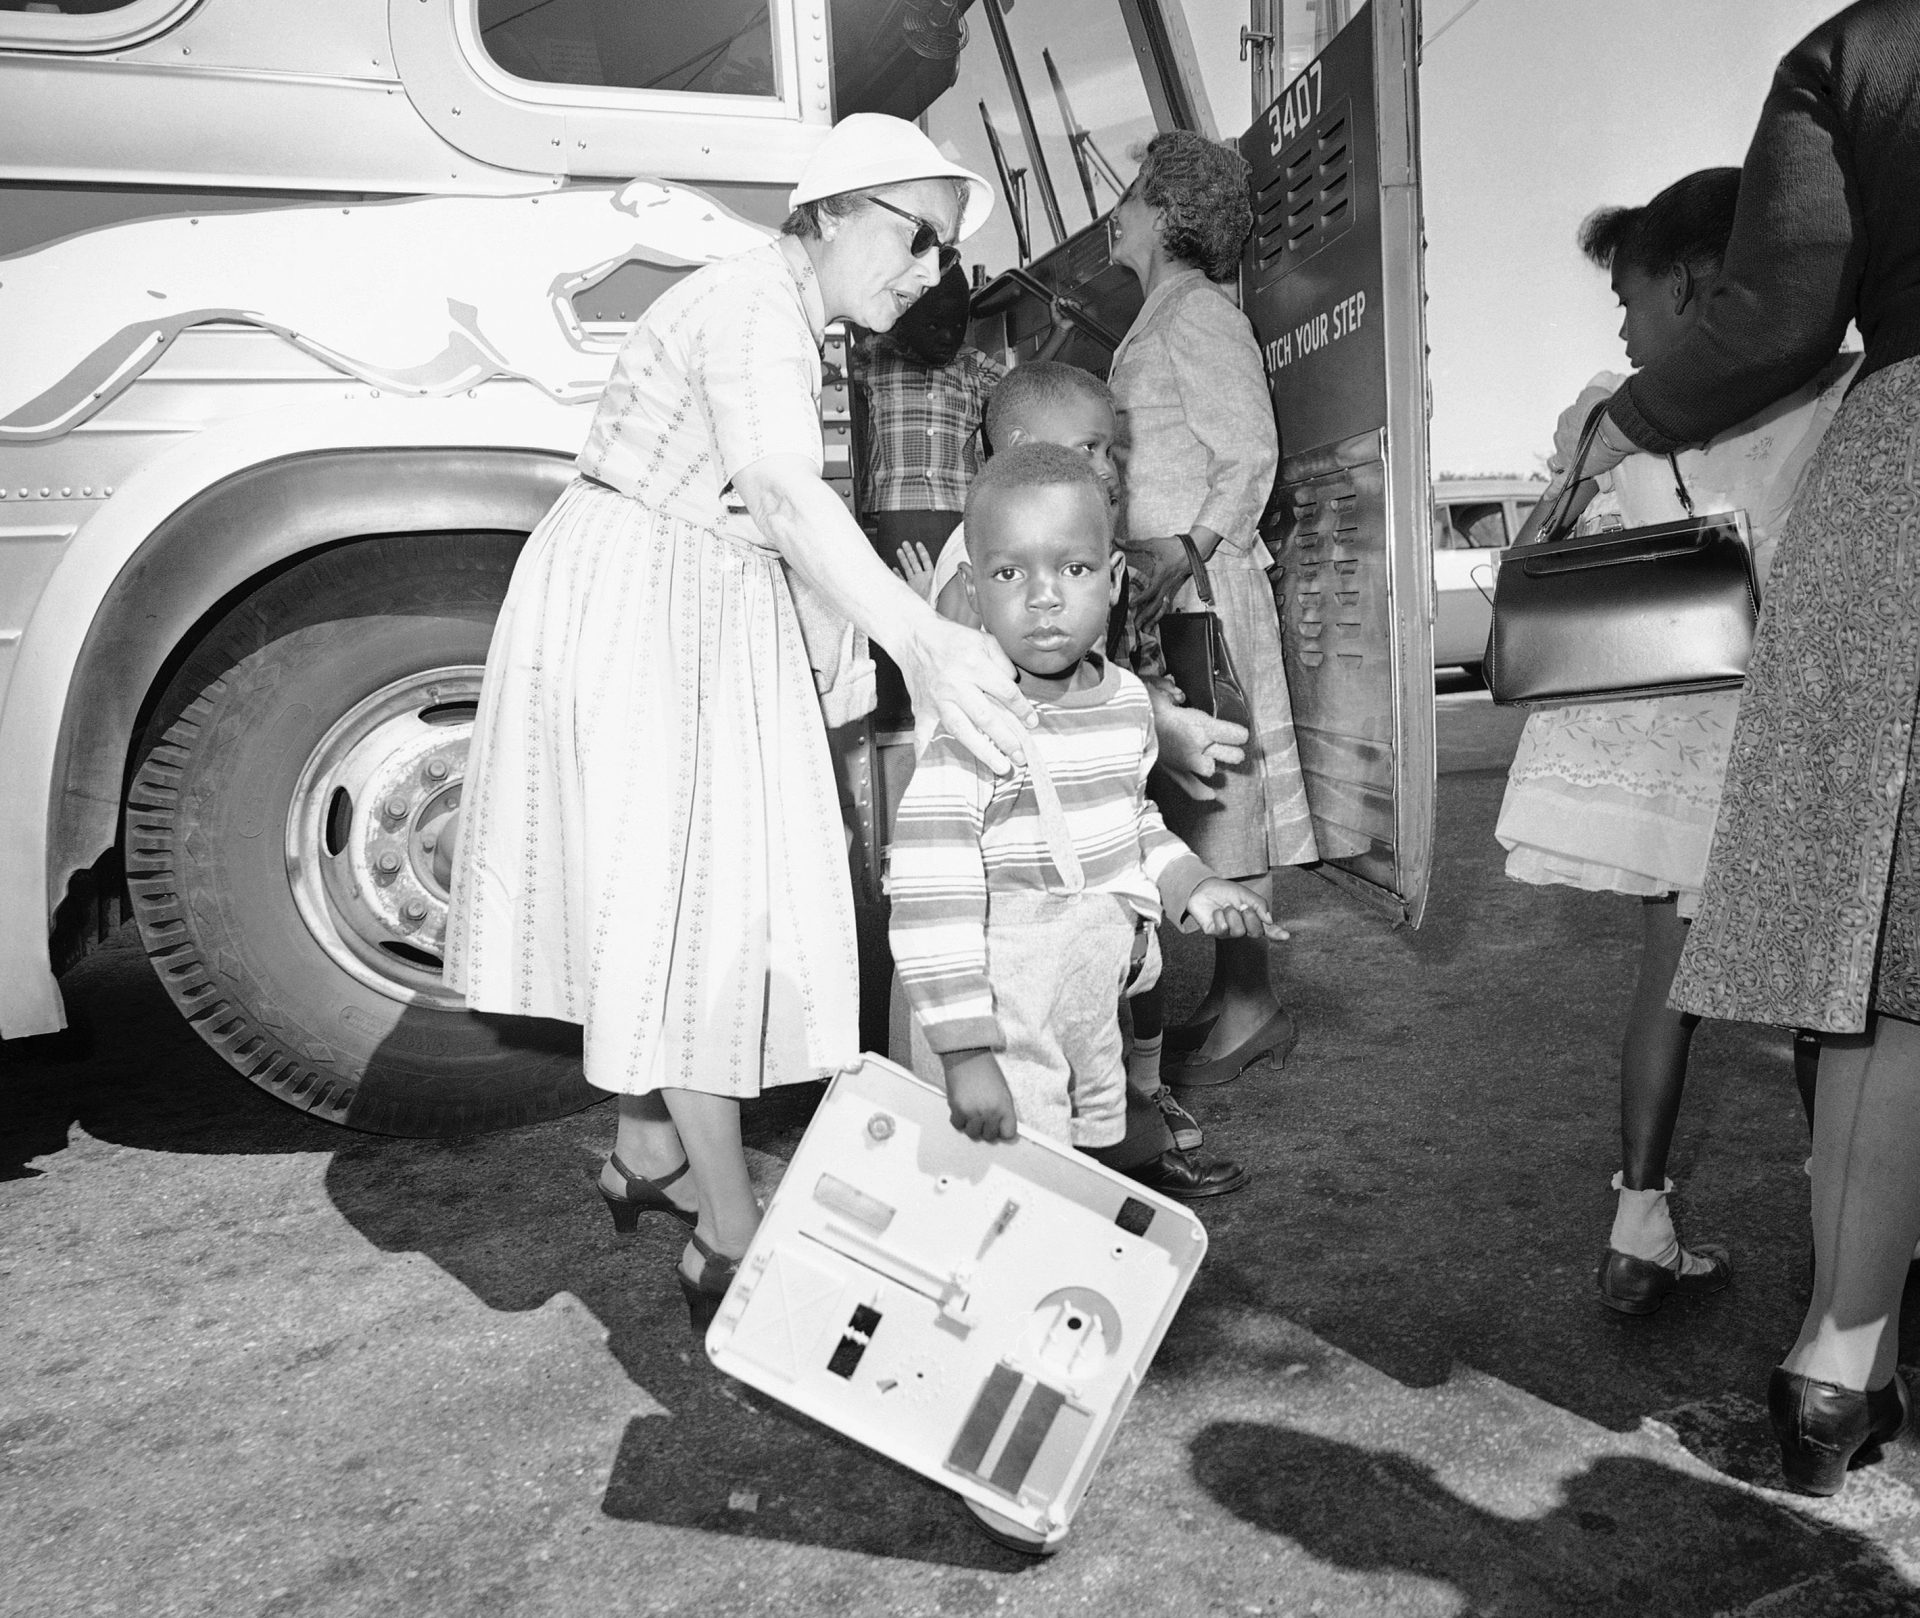 Two unidentified women, residents of Hyannis, Mass., help some of the nine children of Lela Mae Williams (not in photo) off the bus, June 8, 1962 at Hyannis on their arrival from Huttig, Ark.